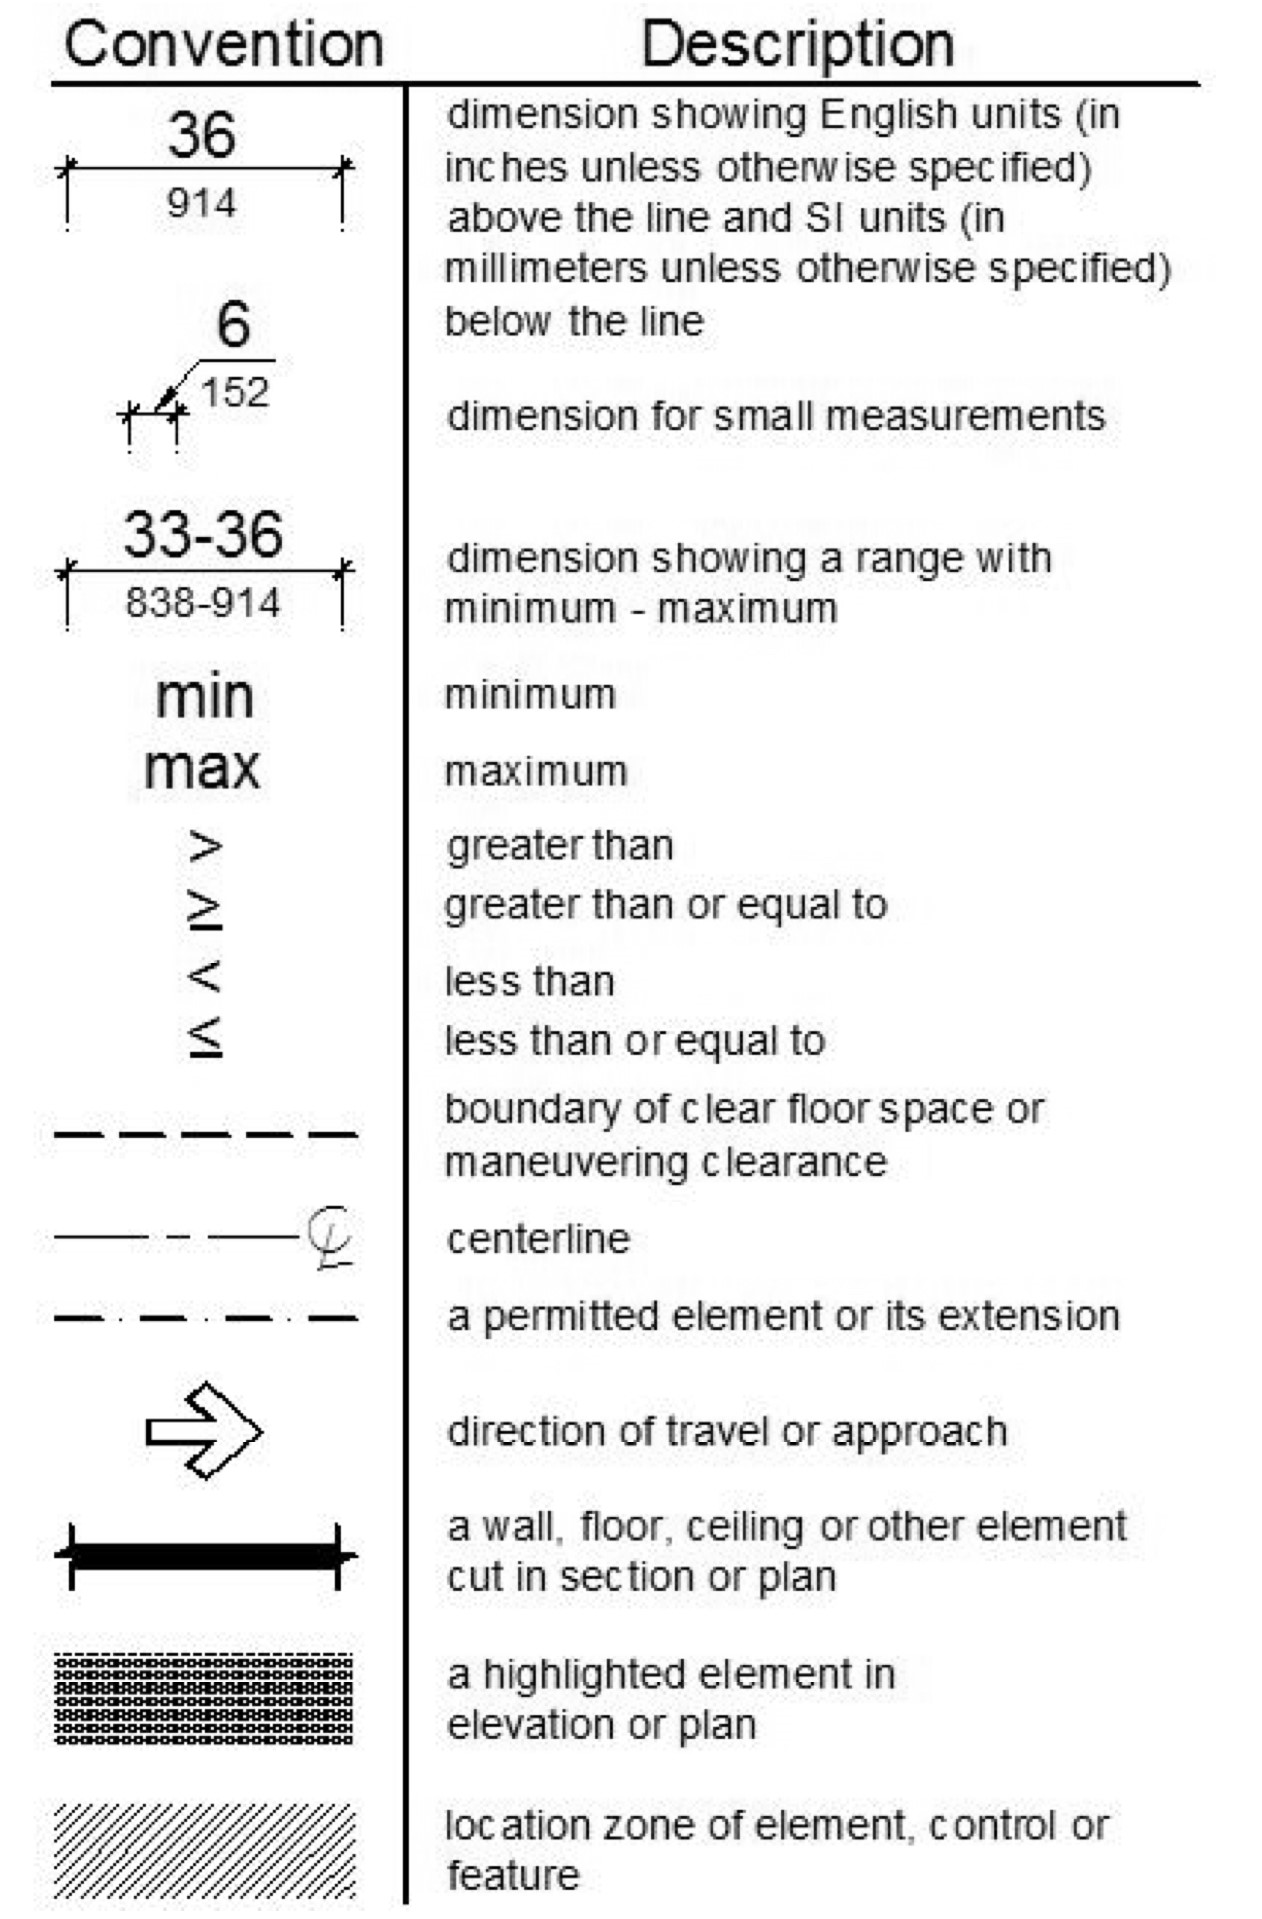 Dimension lines show English units above the line (in inches unless otherwise noted) and the SI units (in millimeters unless otherwise noted).  Small measurements show the dimension with an arrow pointing to the dimension line.  Dimension ranges are shown above the line in inches and below the line in millimeters.  Min refers to minimum, and max refers to the maximum.  Mathematical symbols indicate greater than, greater than or equal to, less than, and less than or equal to.  A dashed line identifies the boundary of clear floor space or maneuvering space.  A line with alternating shot and long dashes with a c and l at the end indicate the centerline.  A dashed line with longer spaces indicates a permitted element or its extension.  An arrow is to identify the direction of travel or approach.  A thick black line is used to represent a wall, floor, ceiling or other element cut in section or plan.  Gray shading is used to show an element in elevation or plan.  Hatching is used to show the location zone of elements, controls, or features.  Terms defined by this document are shown in italics.